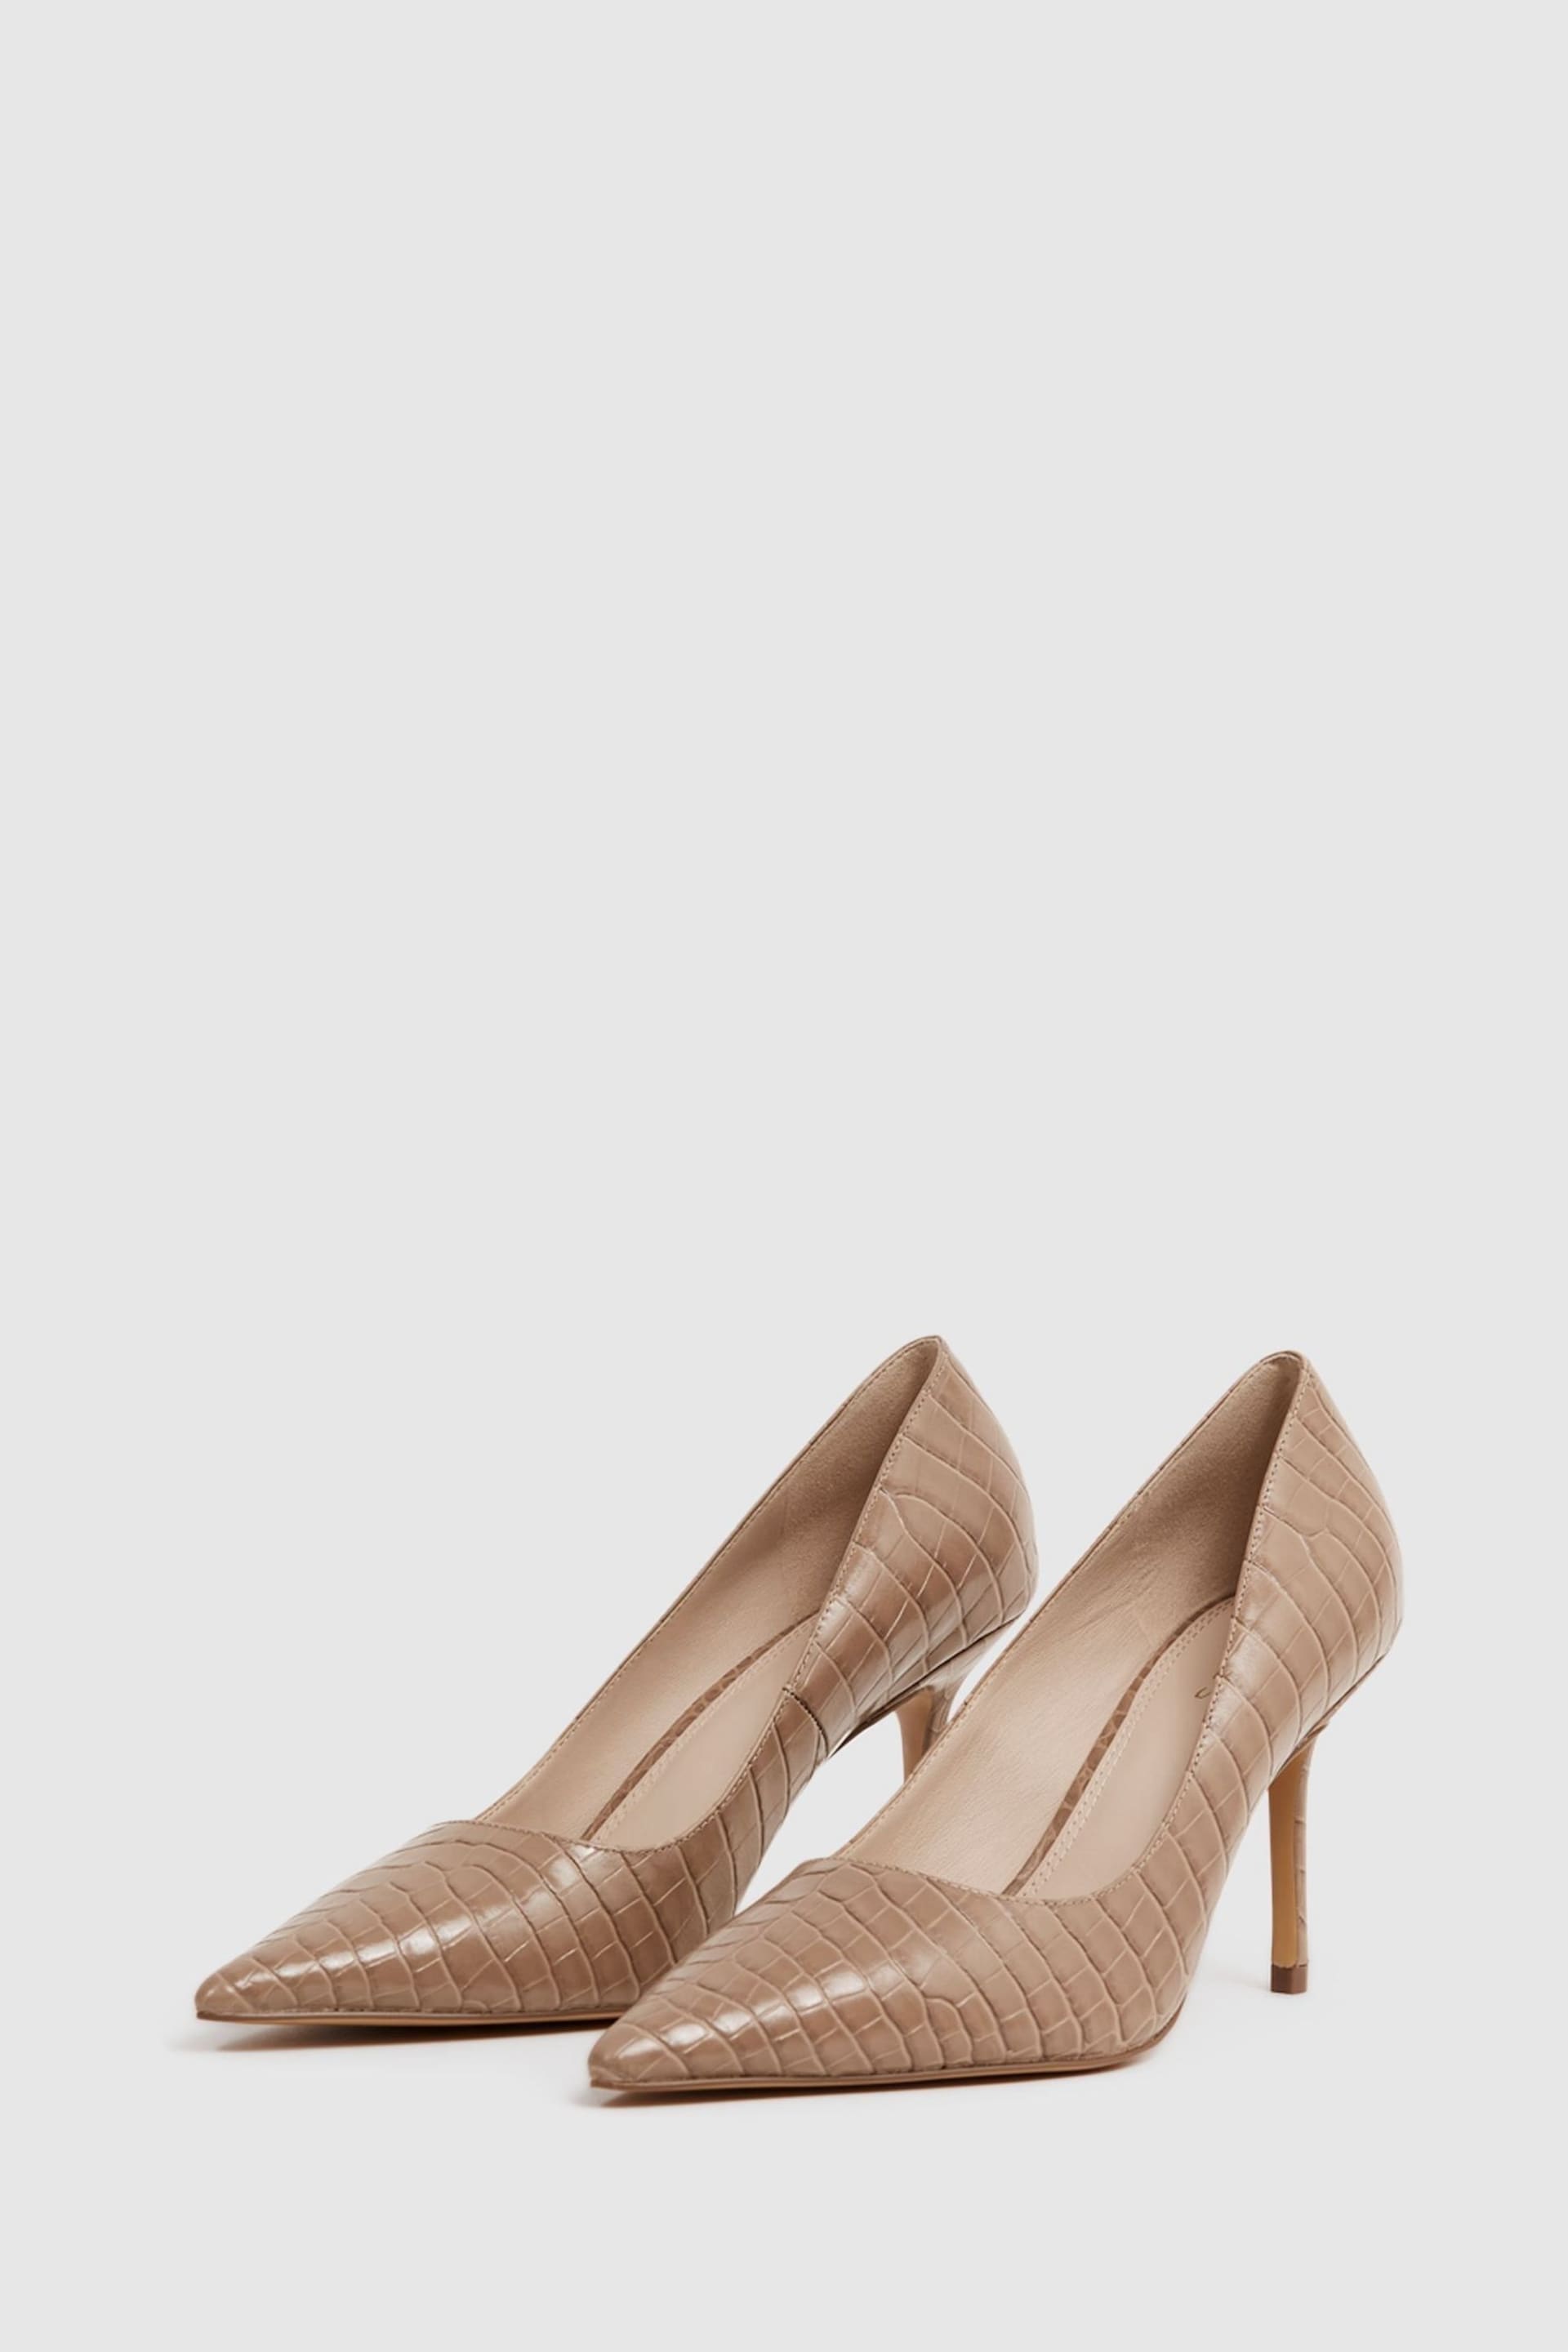 Reiss Camel Elina Mid Heel Leather Court Shoes - Image 4 of 6